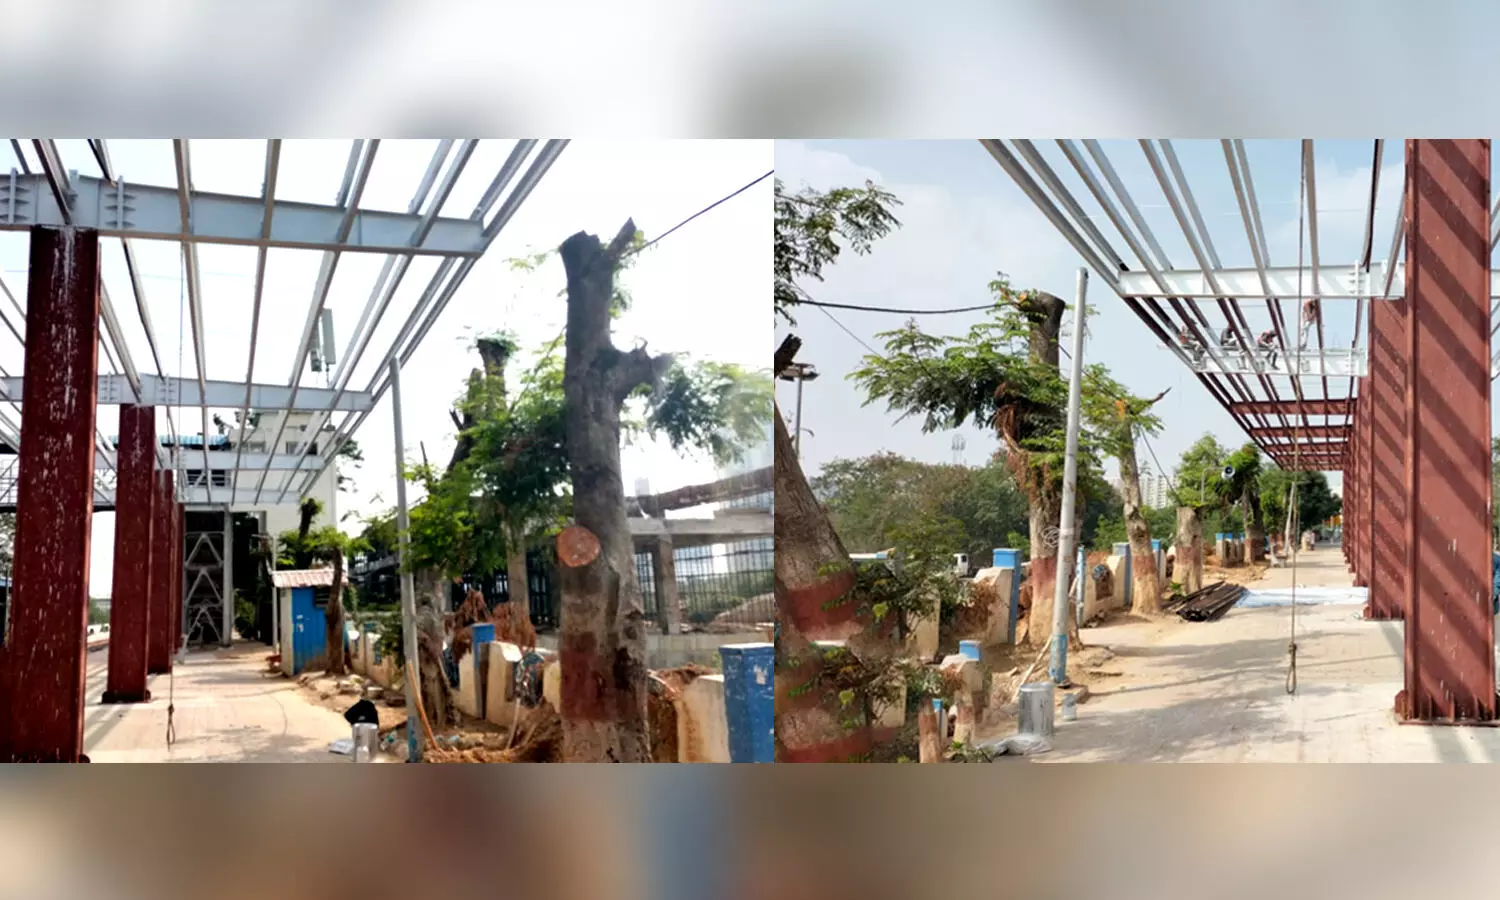 SCR fined Rs. 50,000 for unscientific pruning of 13 tree branches at HITEC City railway station